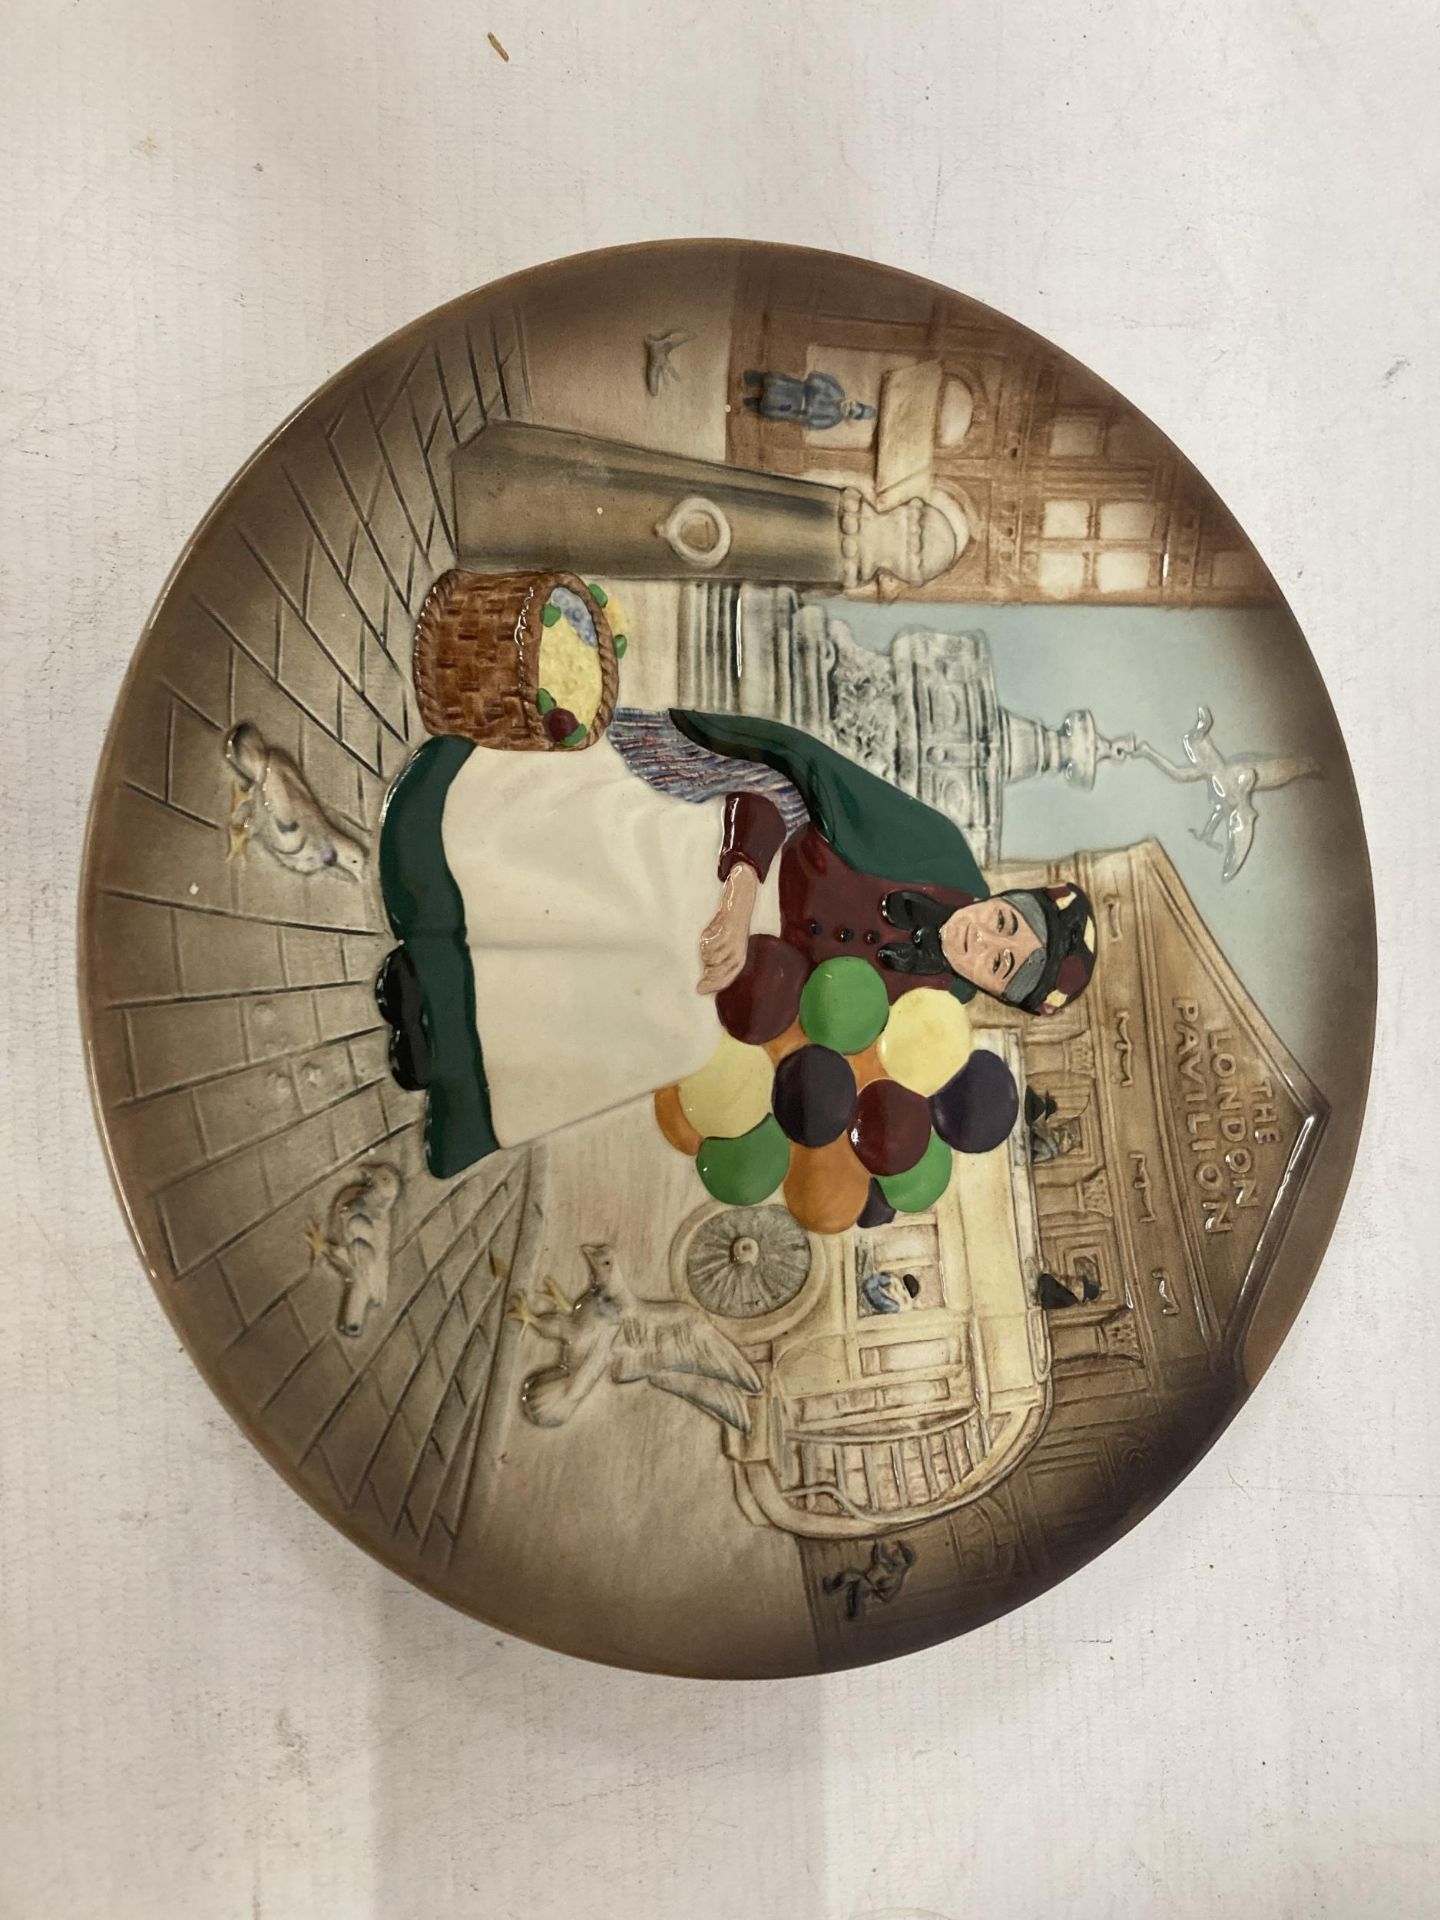 A ROYAL DOULTON PLATE "THE OLD BALLOON SELLER" D6649 (2ND QUALITY)